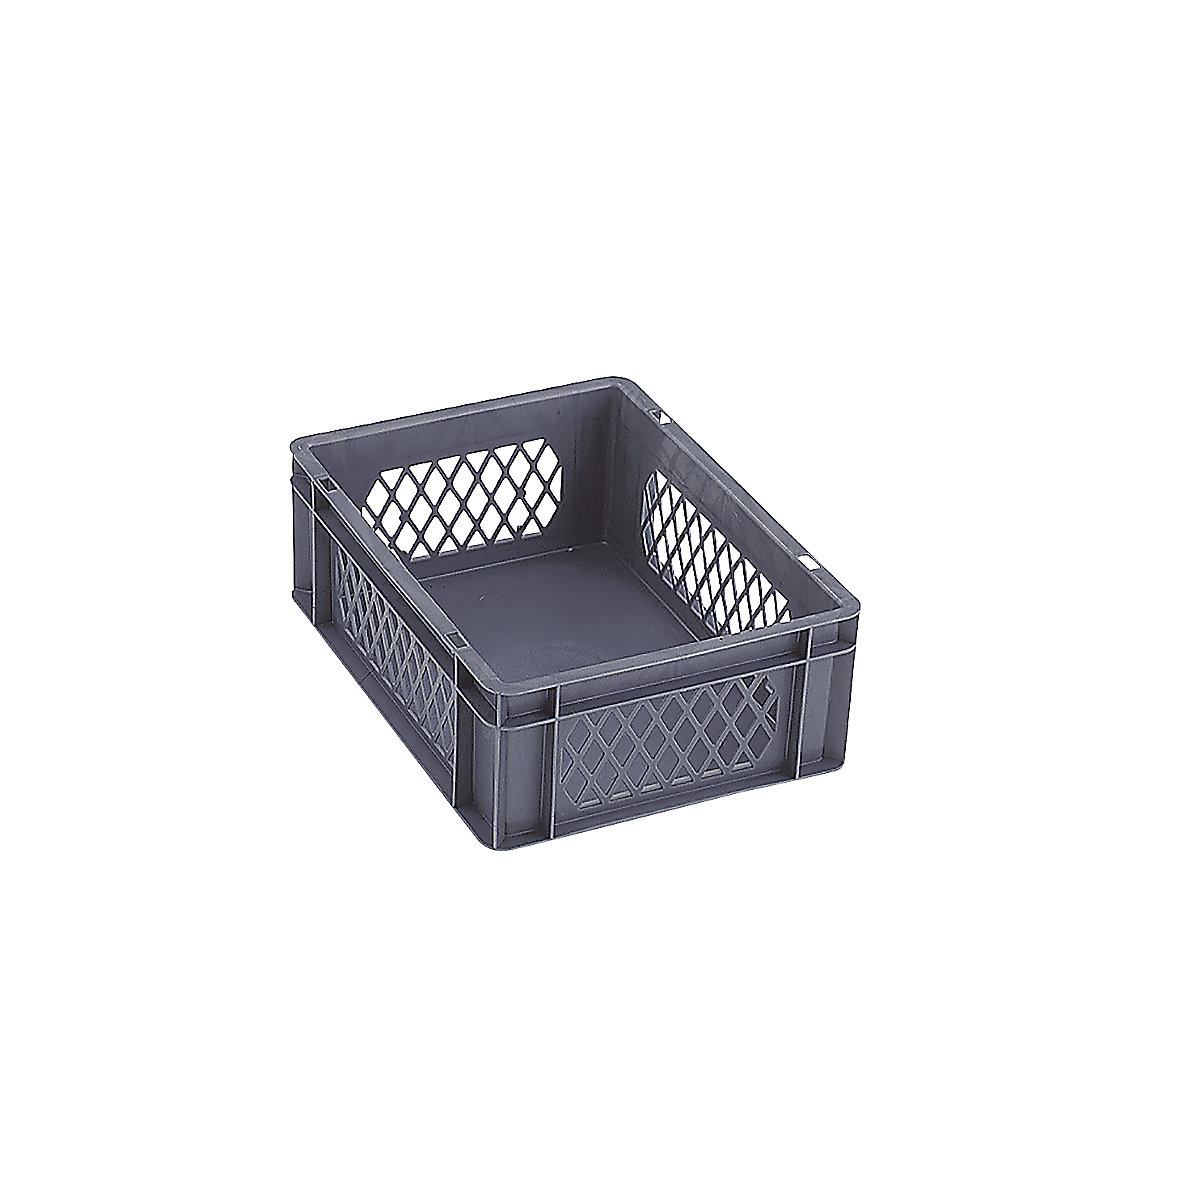 Euro stacking container, perforated walls, closed base, LxWxH 400 x 300 x 145 mm, grey, pack of 5